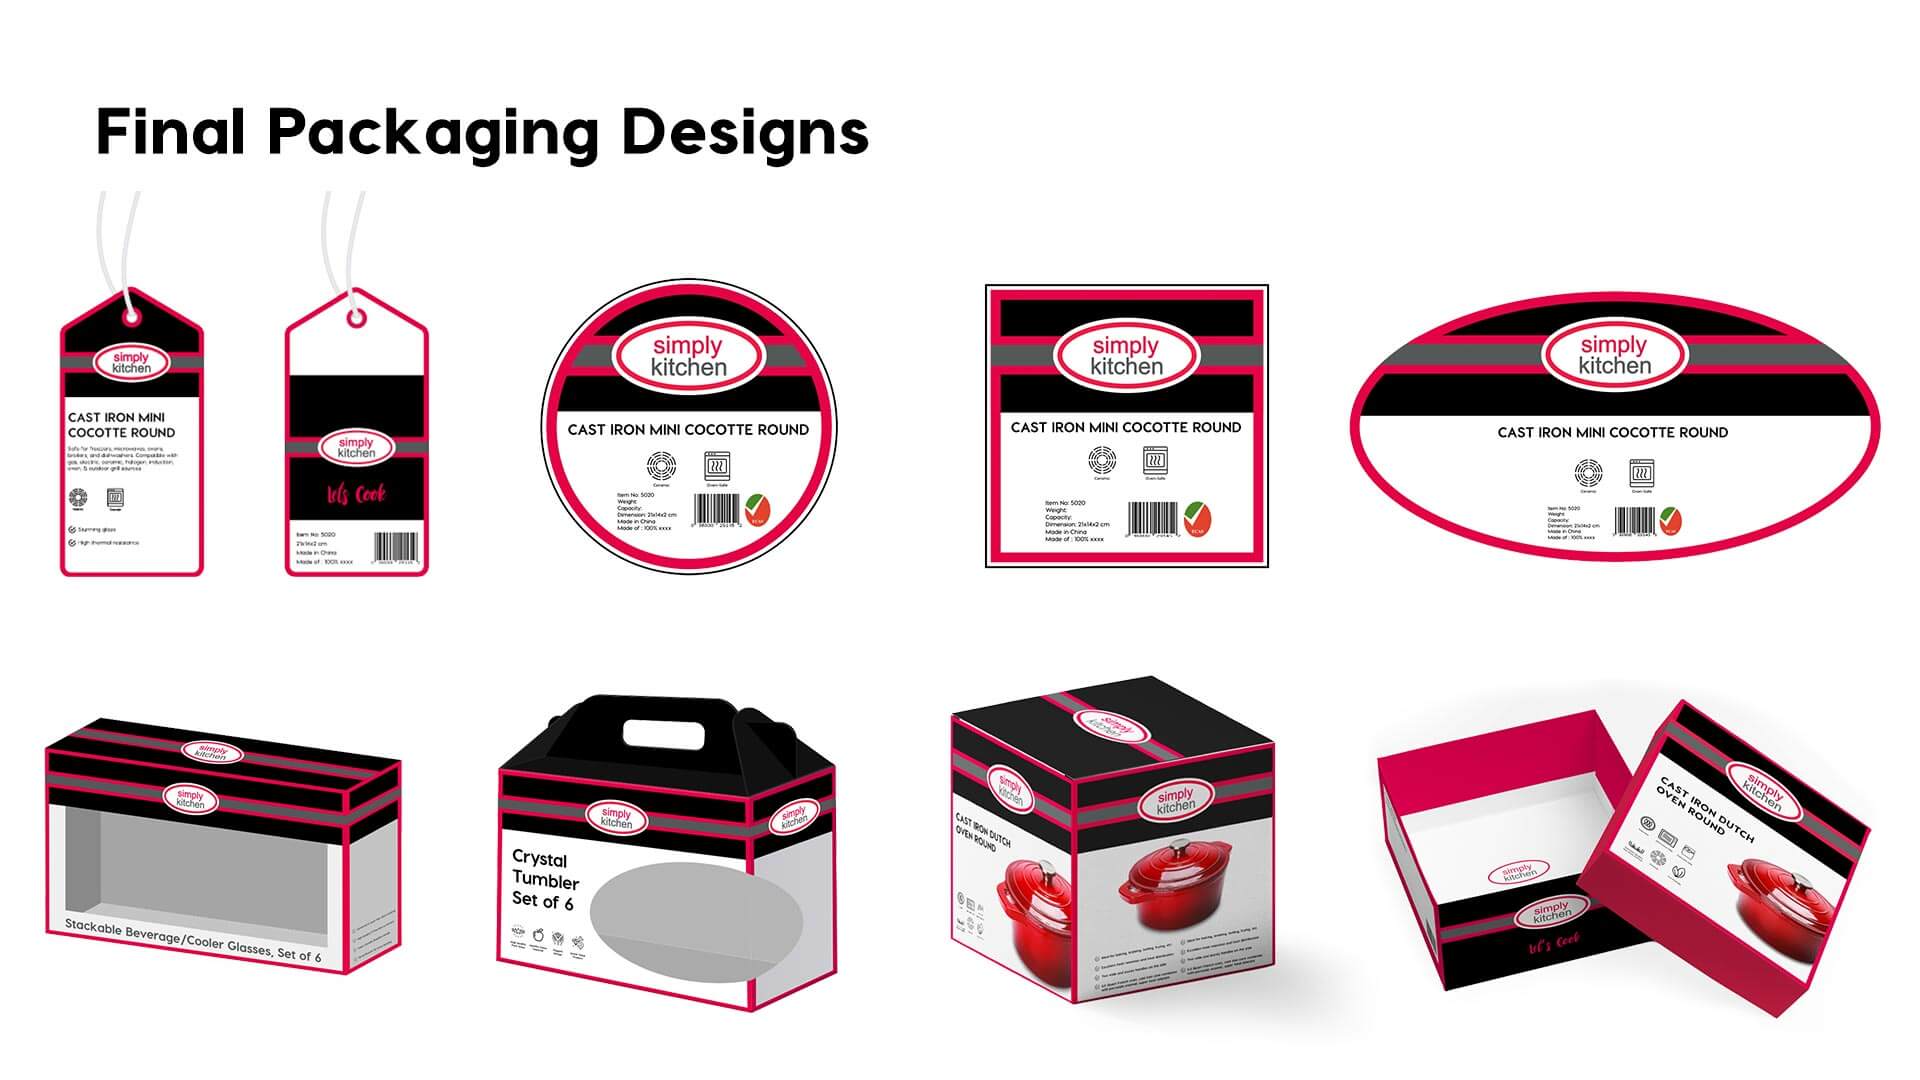 Simply Kitchen Packaging Design